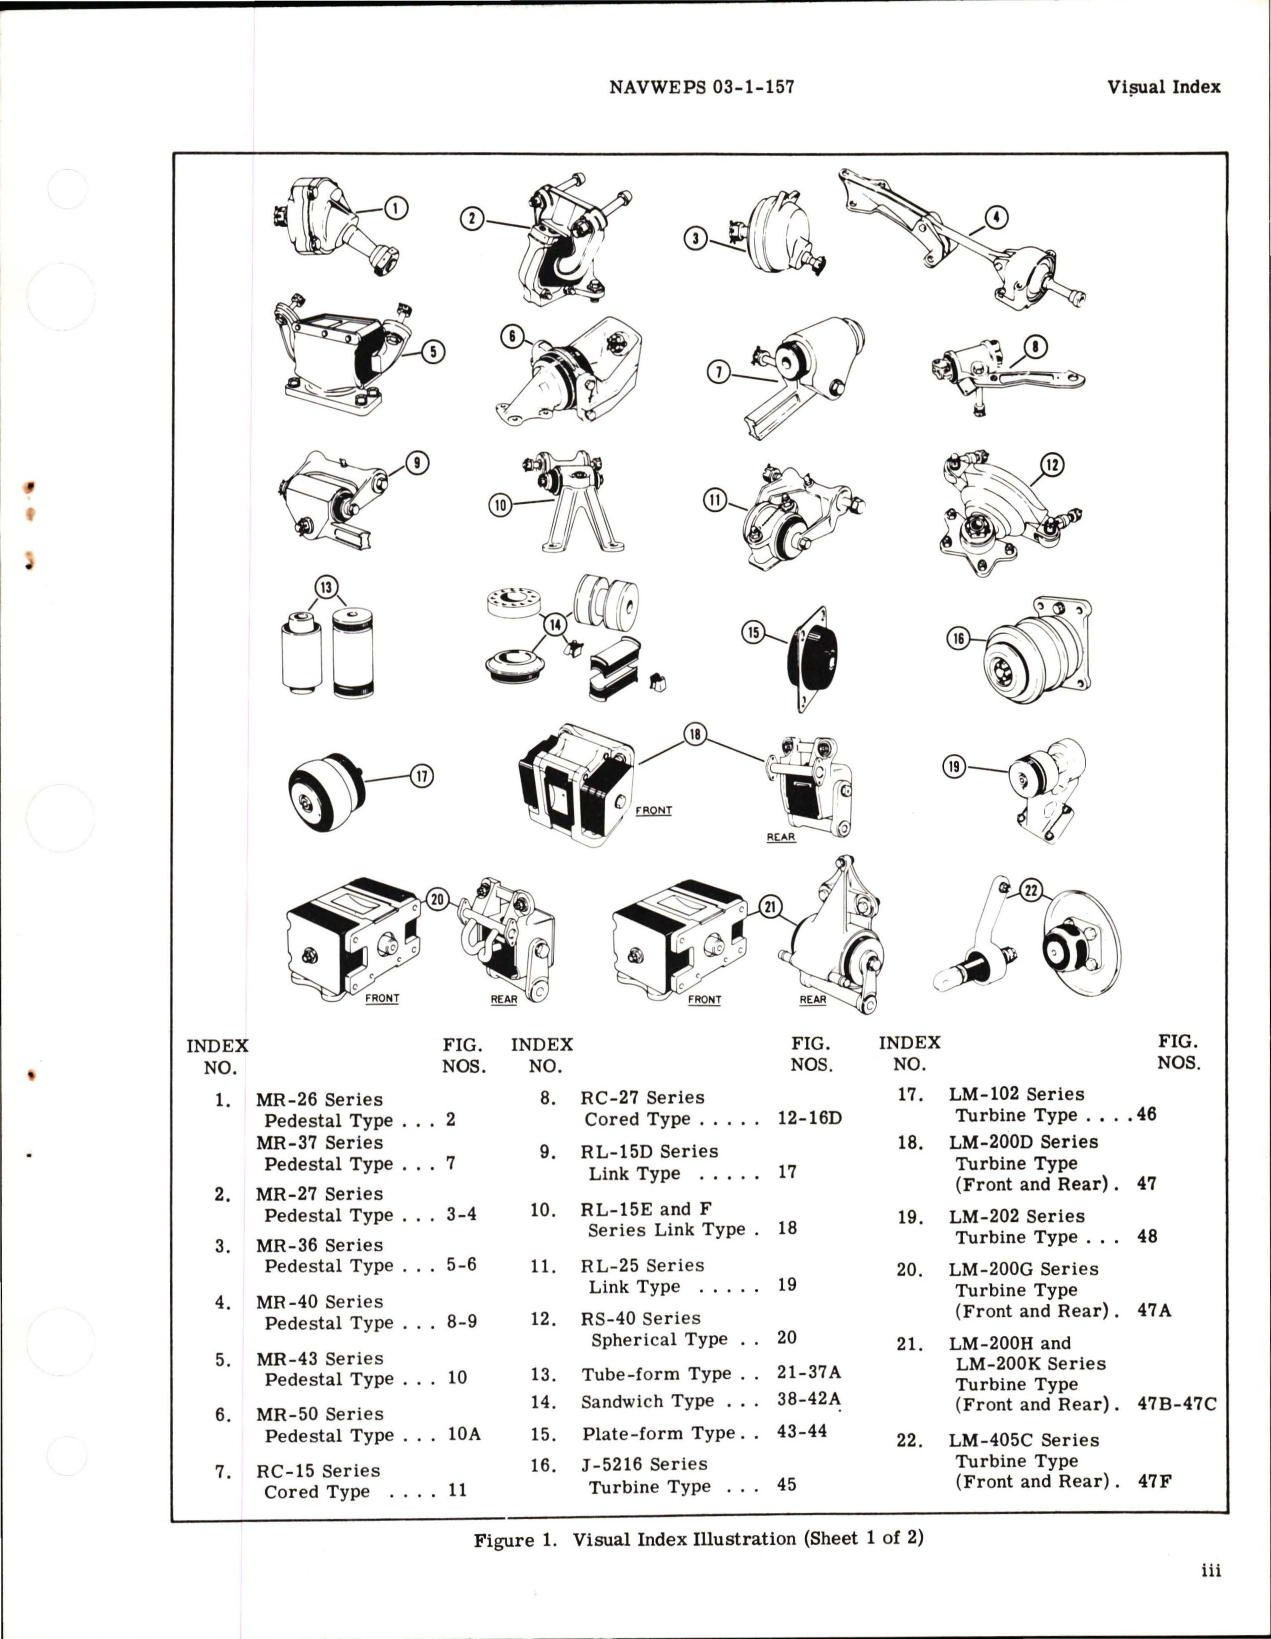 Sample page 5 from AirCorps Library document: Illustrated Parts Breakdown for Engine Mountings 